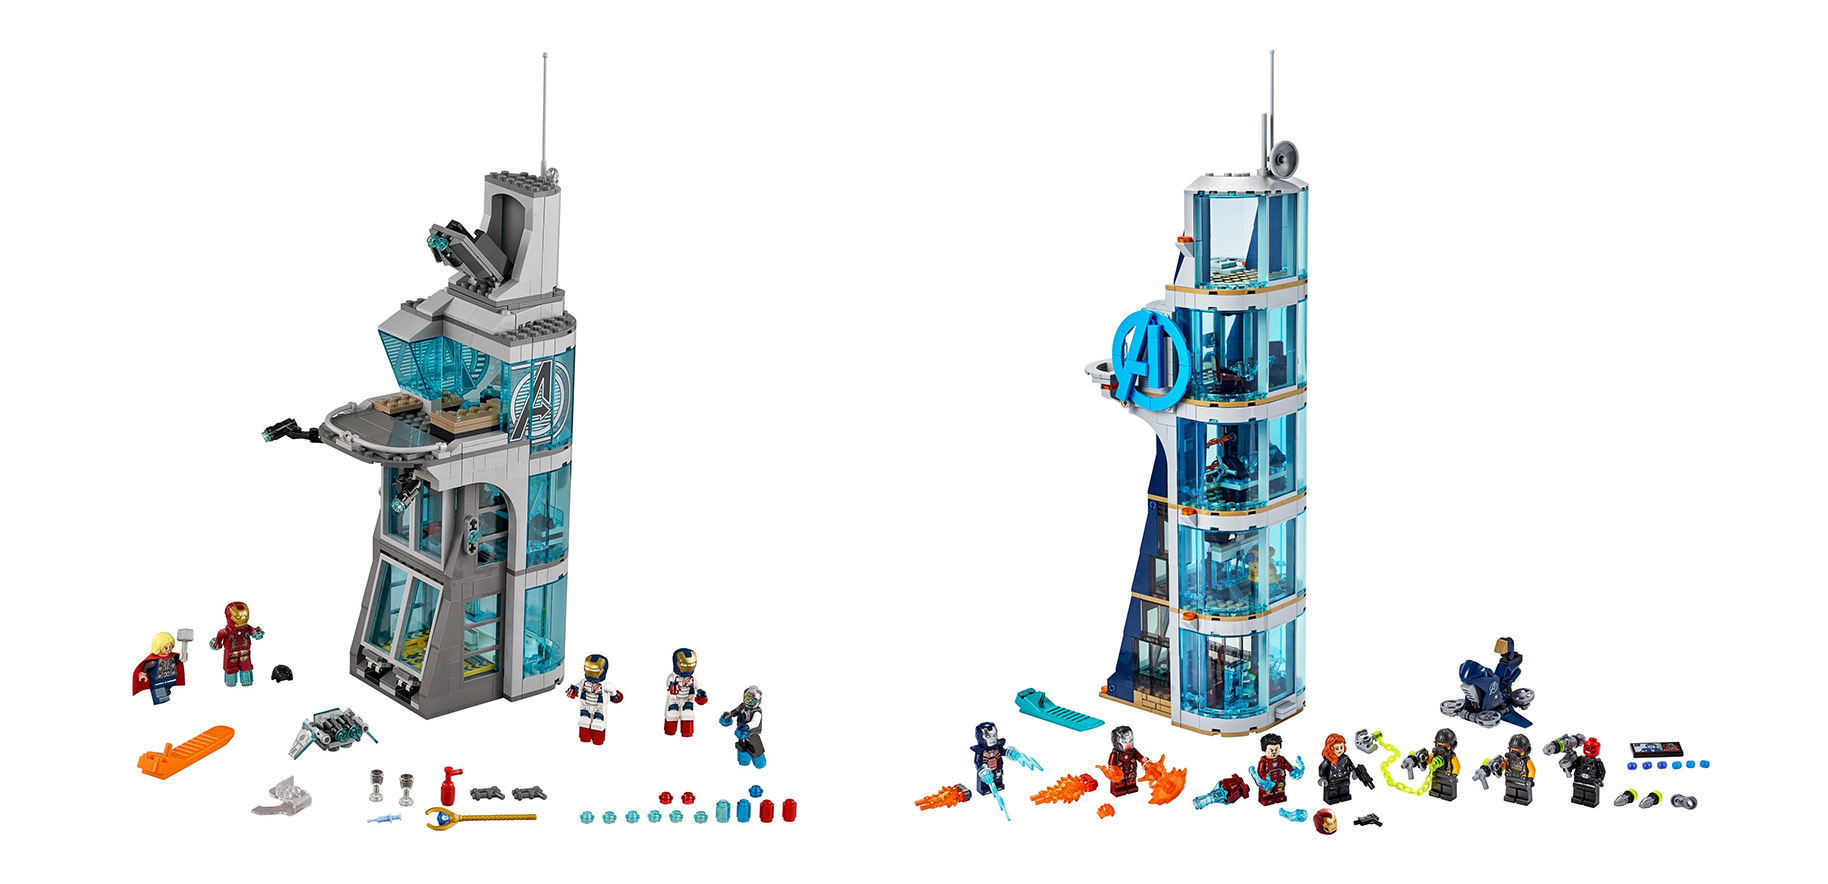 LEGO Avengers Tower: Features, price, where to buy, and all you need to know